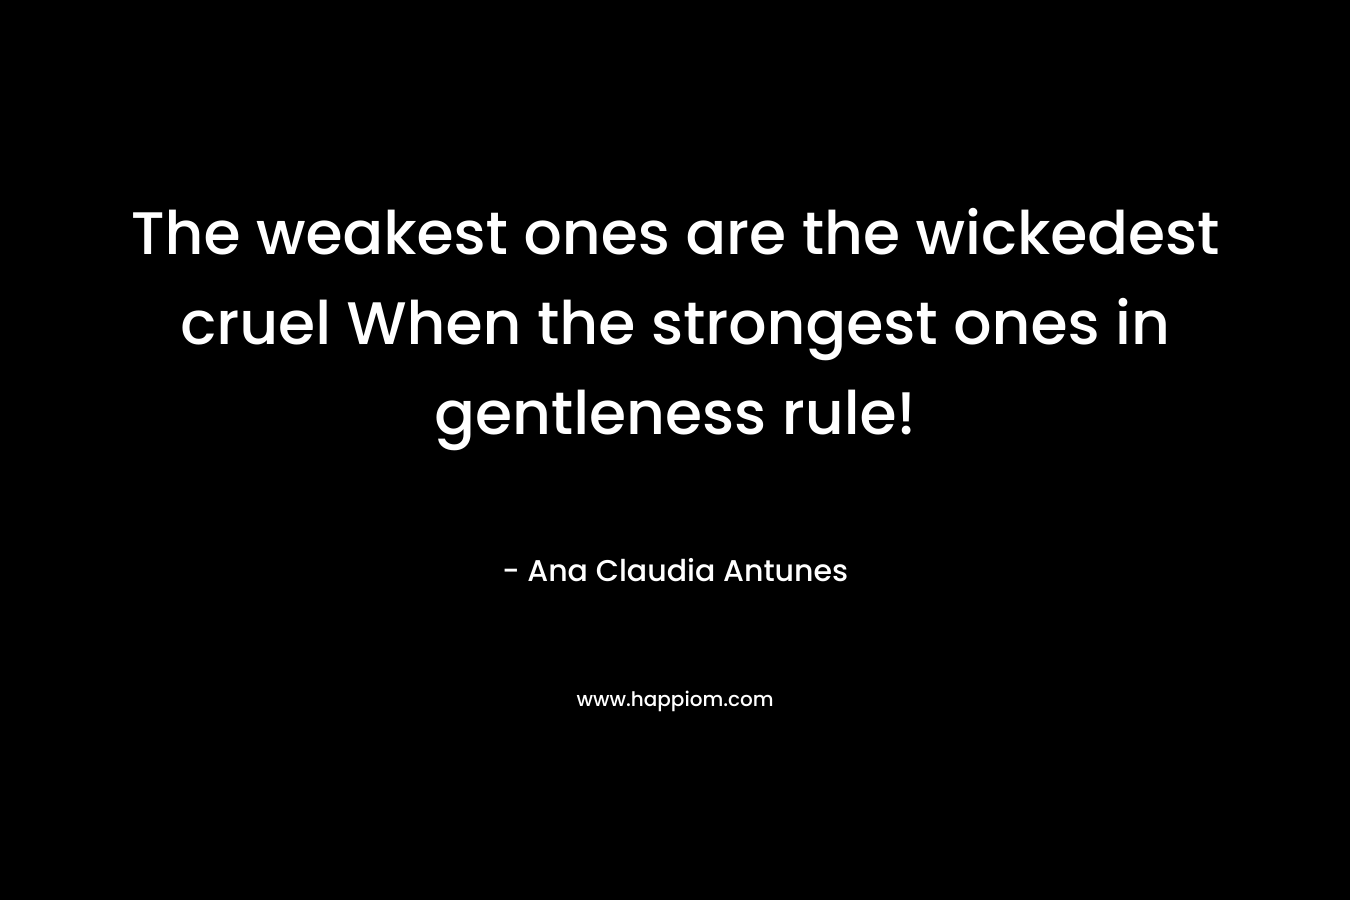 The weakest ones are the wickedest cruel When the strongest ones in gentleness rule! – Ana Claudia Antunes